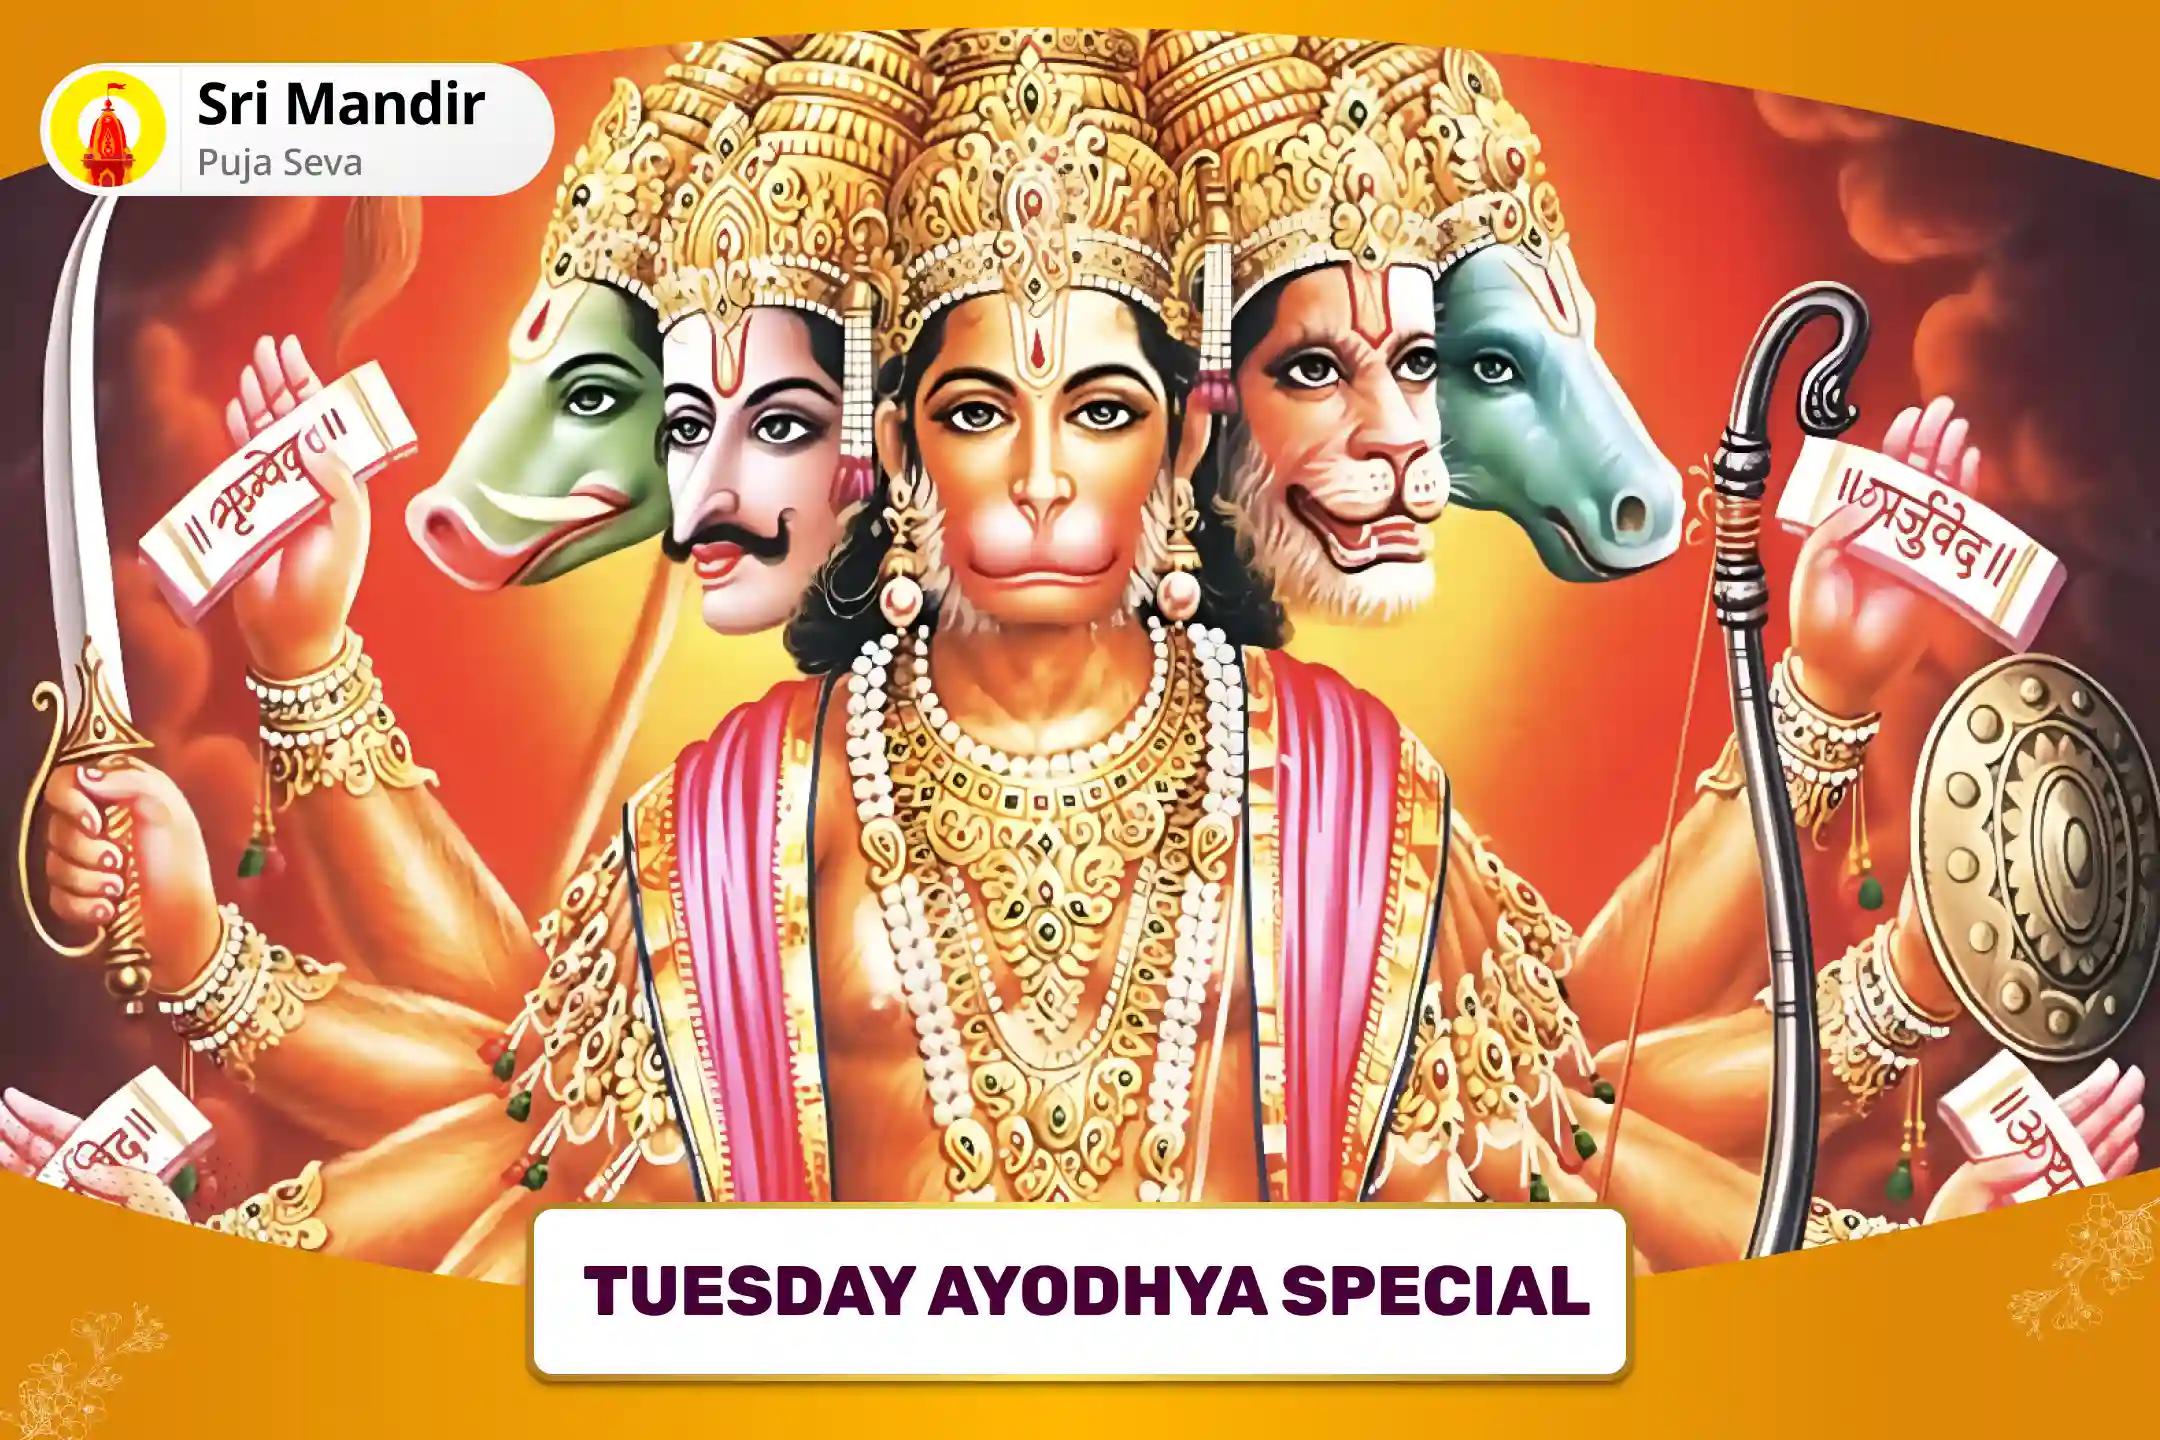 Tuesday Ayodhya Special 11,000 Hanuman Mool Mantra Jaap and Hanuman Chalisa Path For Mental and Physical Strength to Destroy Negativity in Life